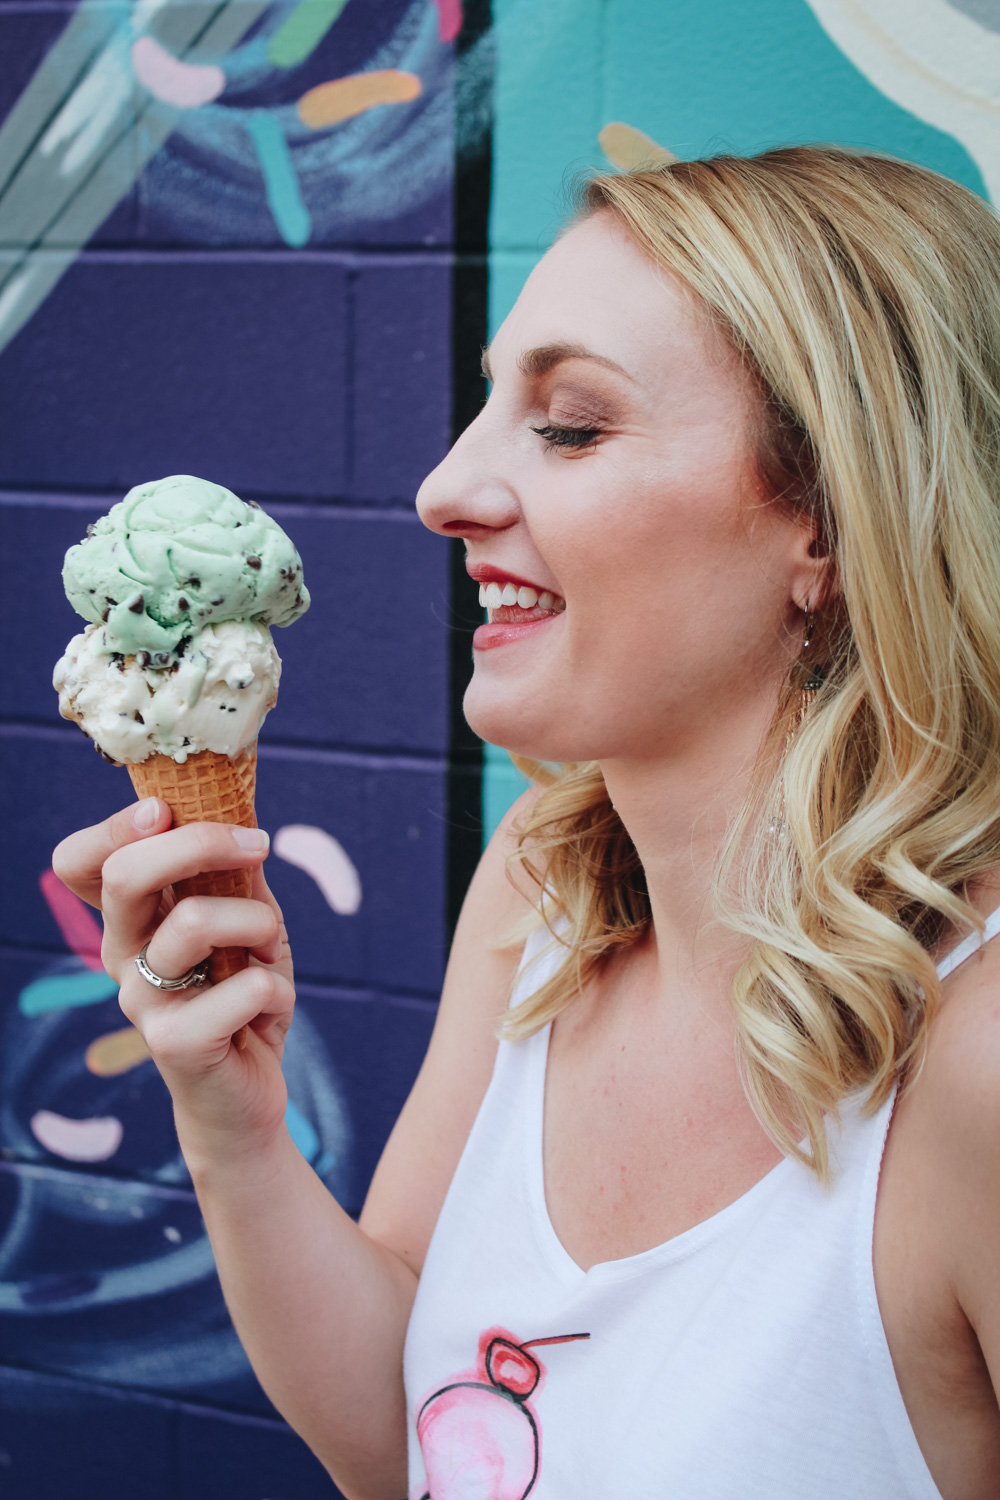 Dreaming of ice cream to beat the winter blues + how I manage my seasonal depression